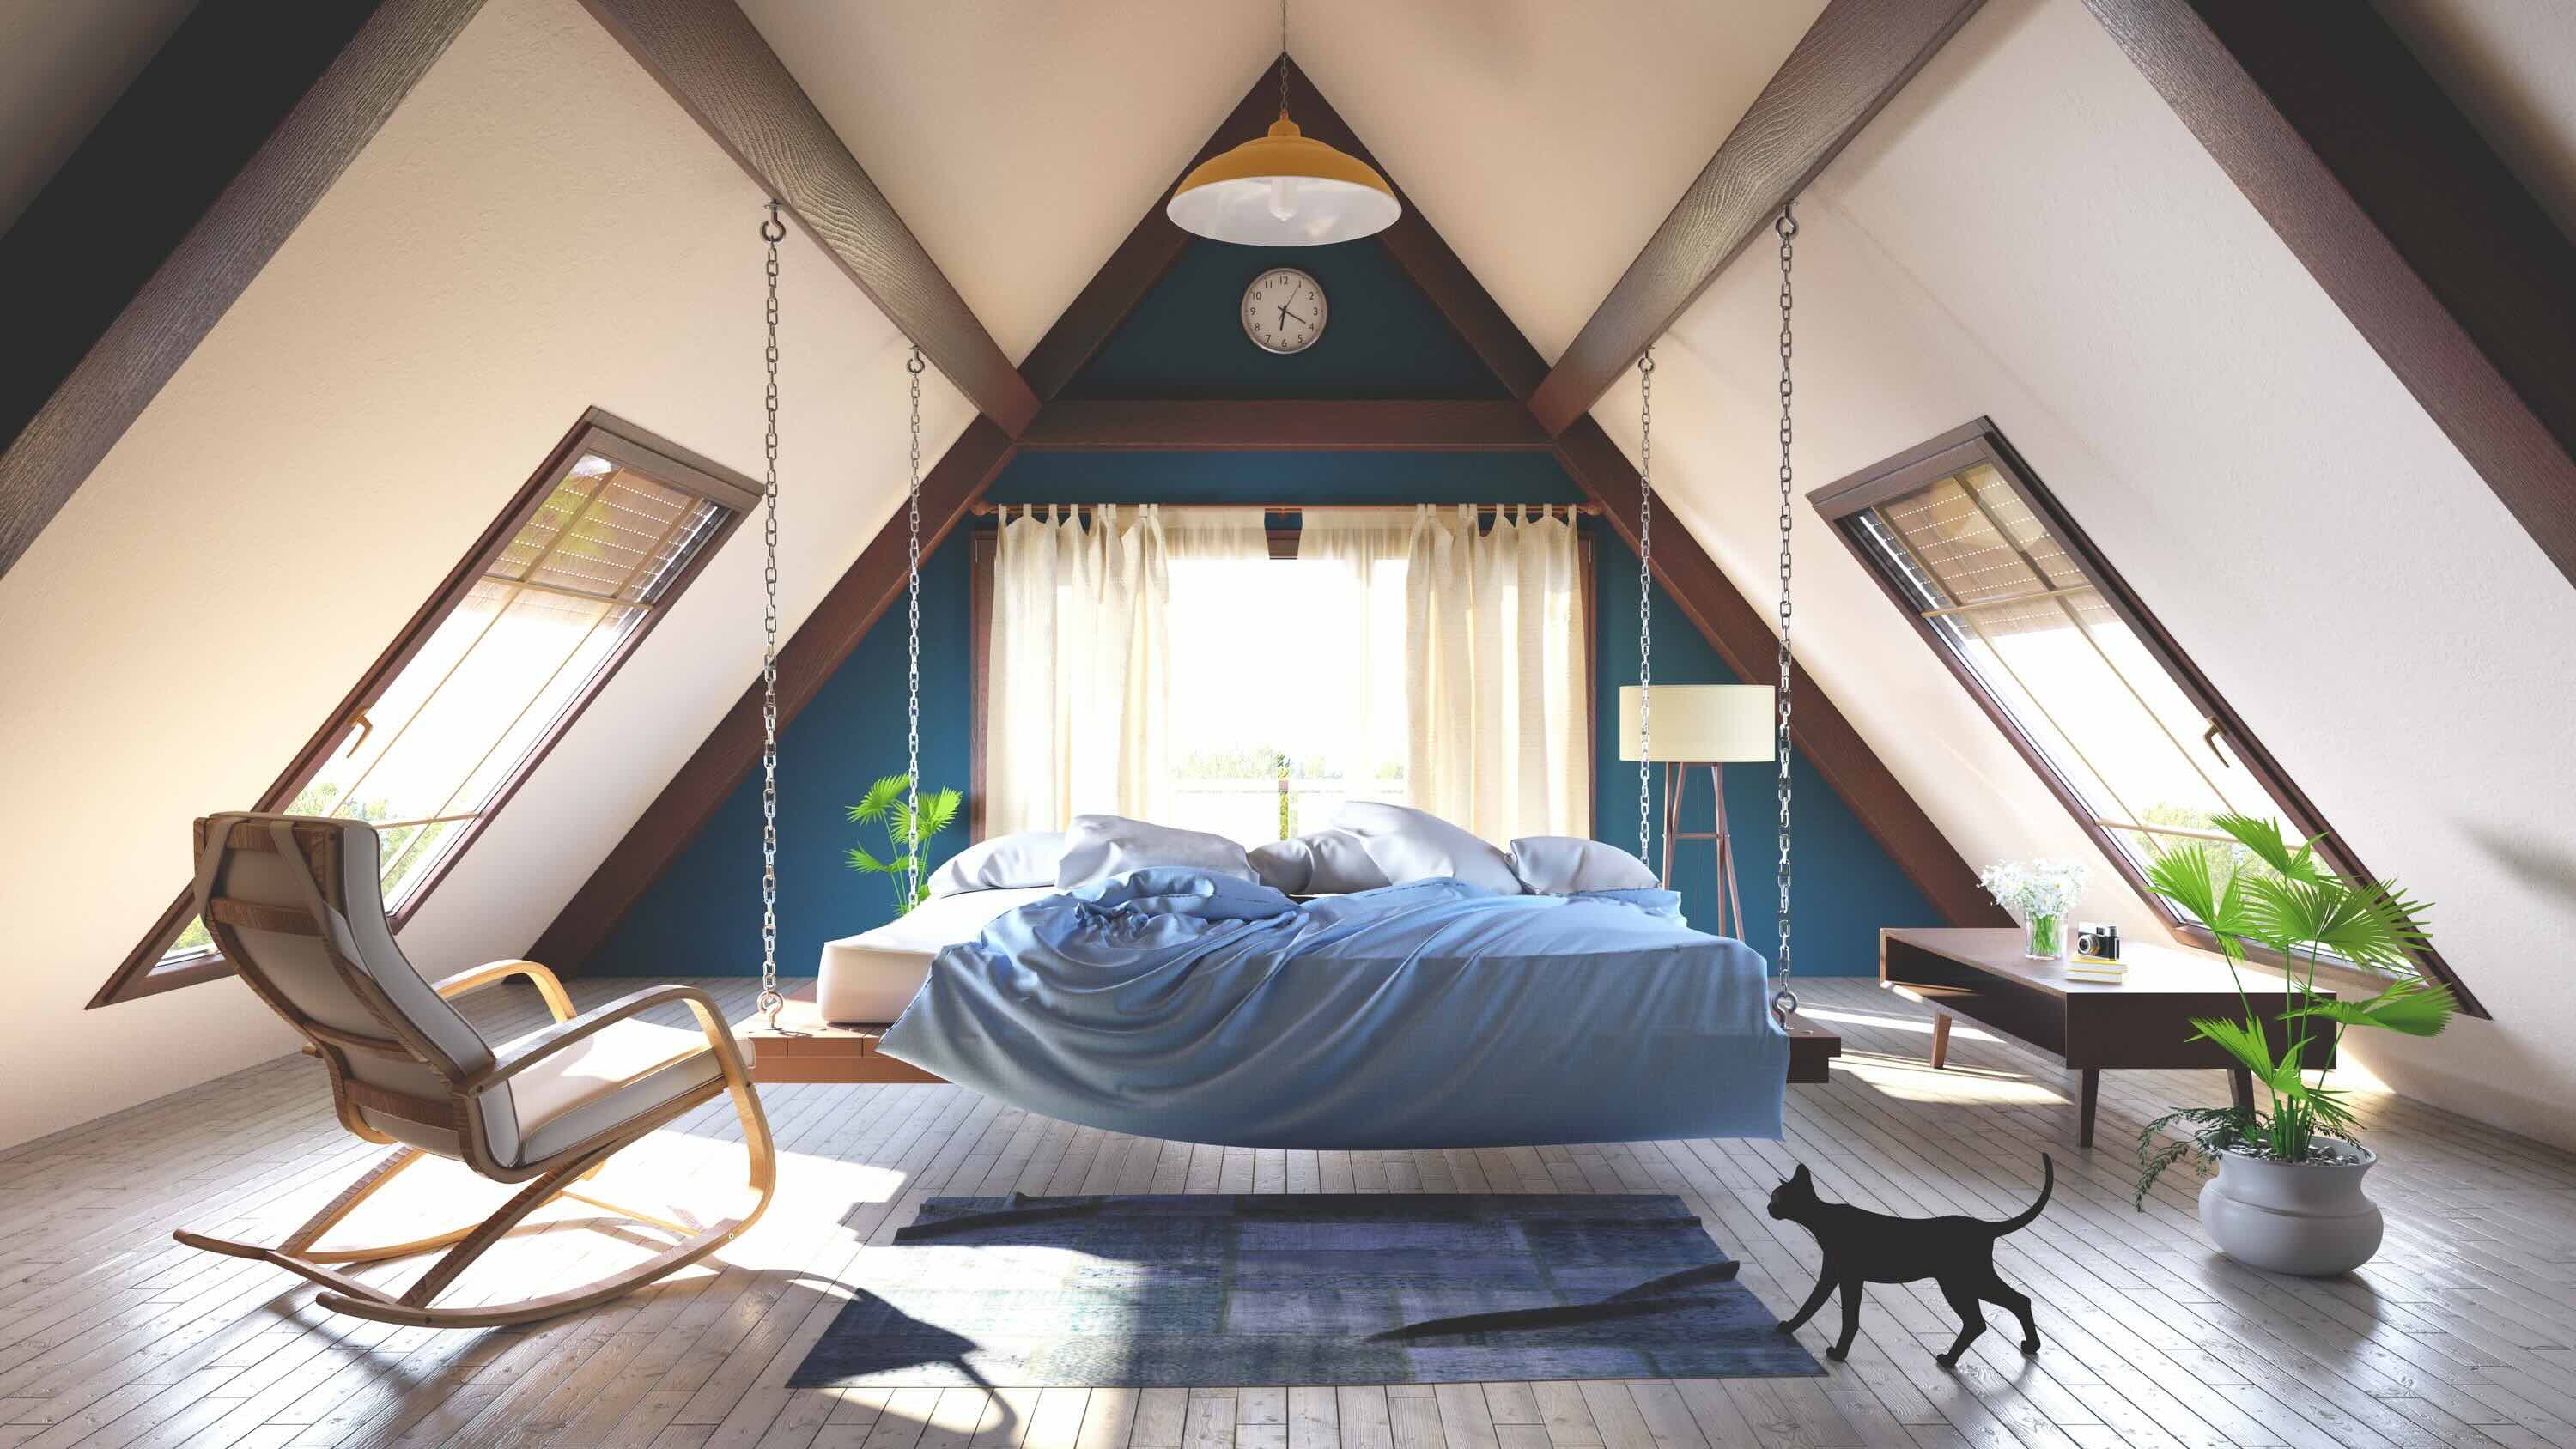 How Much Does It Cost To Convert An Attic Into A Bedroom